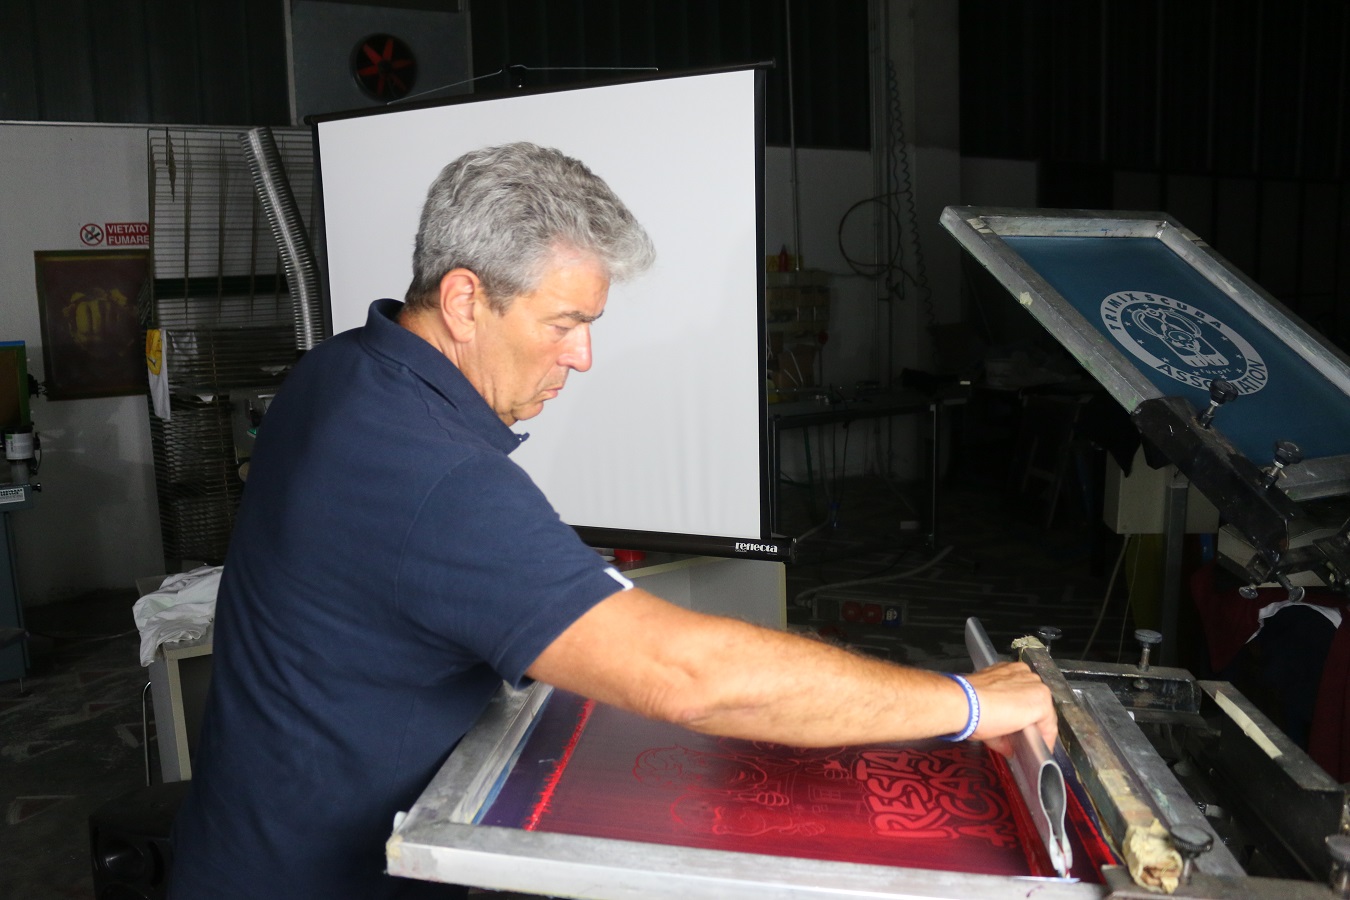 <p>The founder of the Accademia Serigrafica at work</p>
